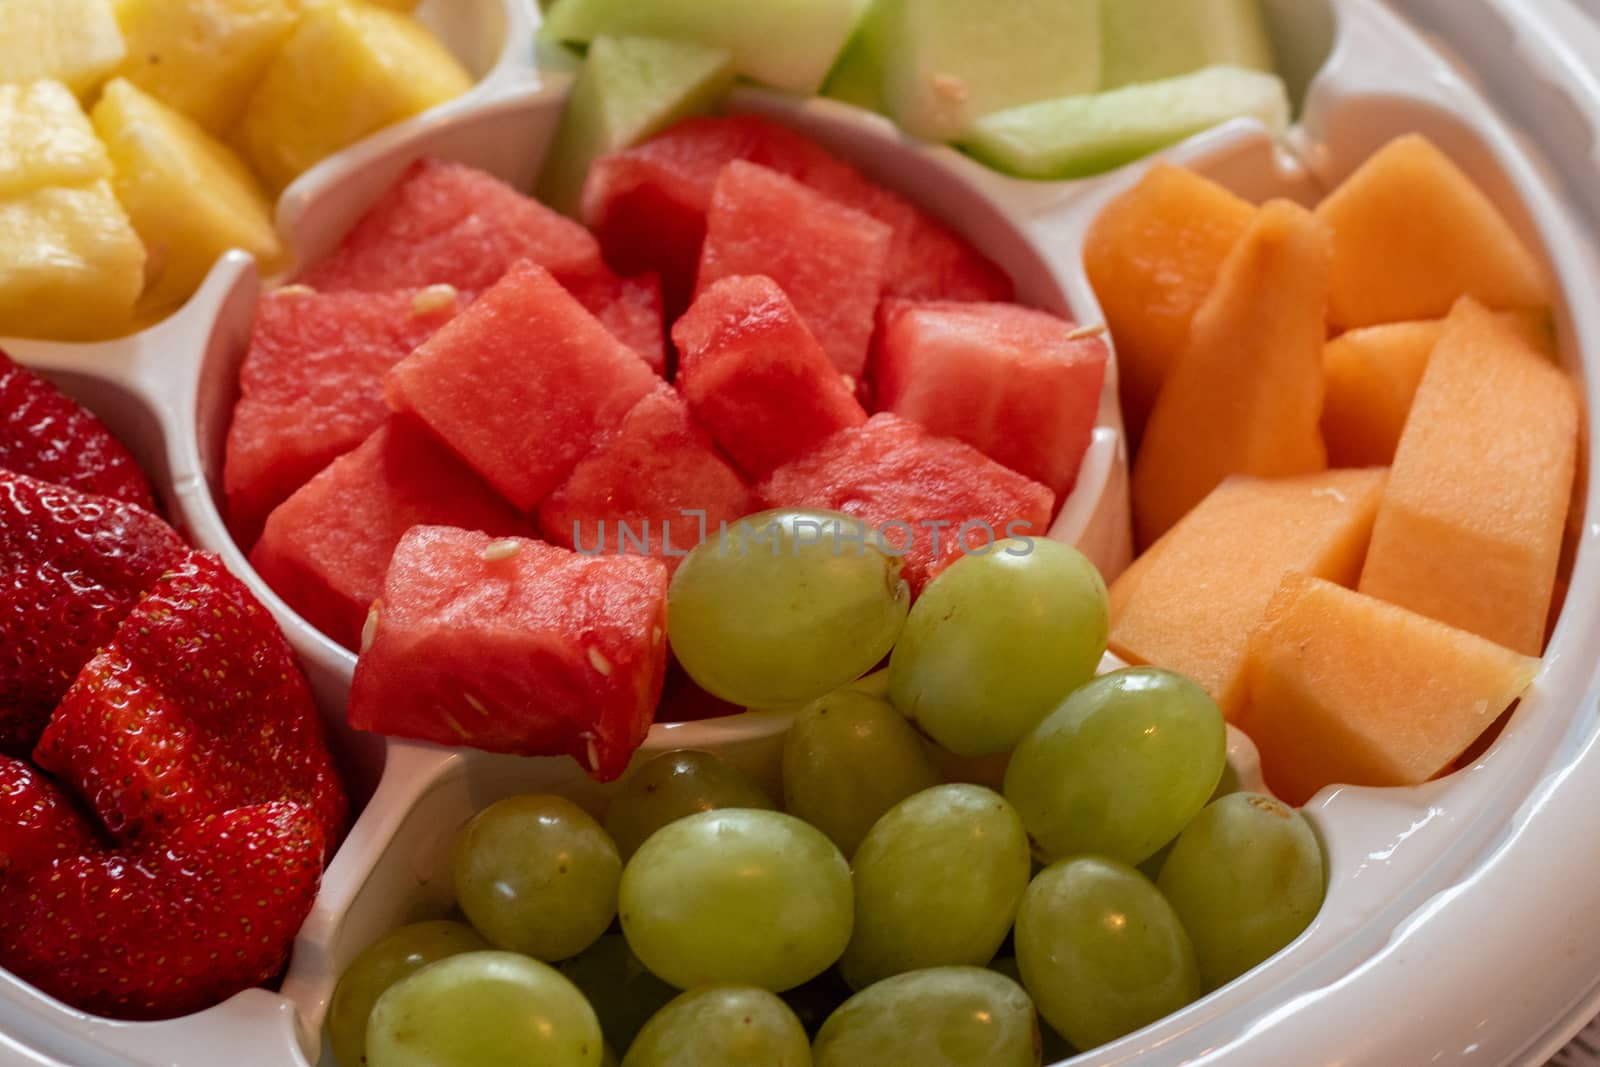 A Platter of Fruit Served in a White Plastic Tray by colintemple